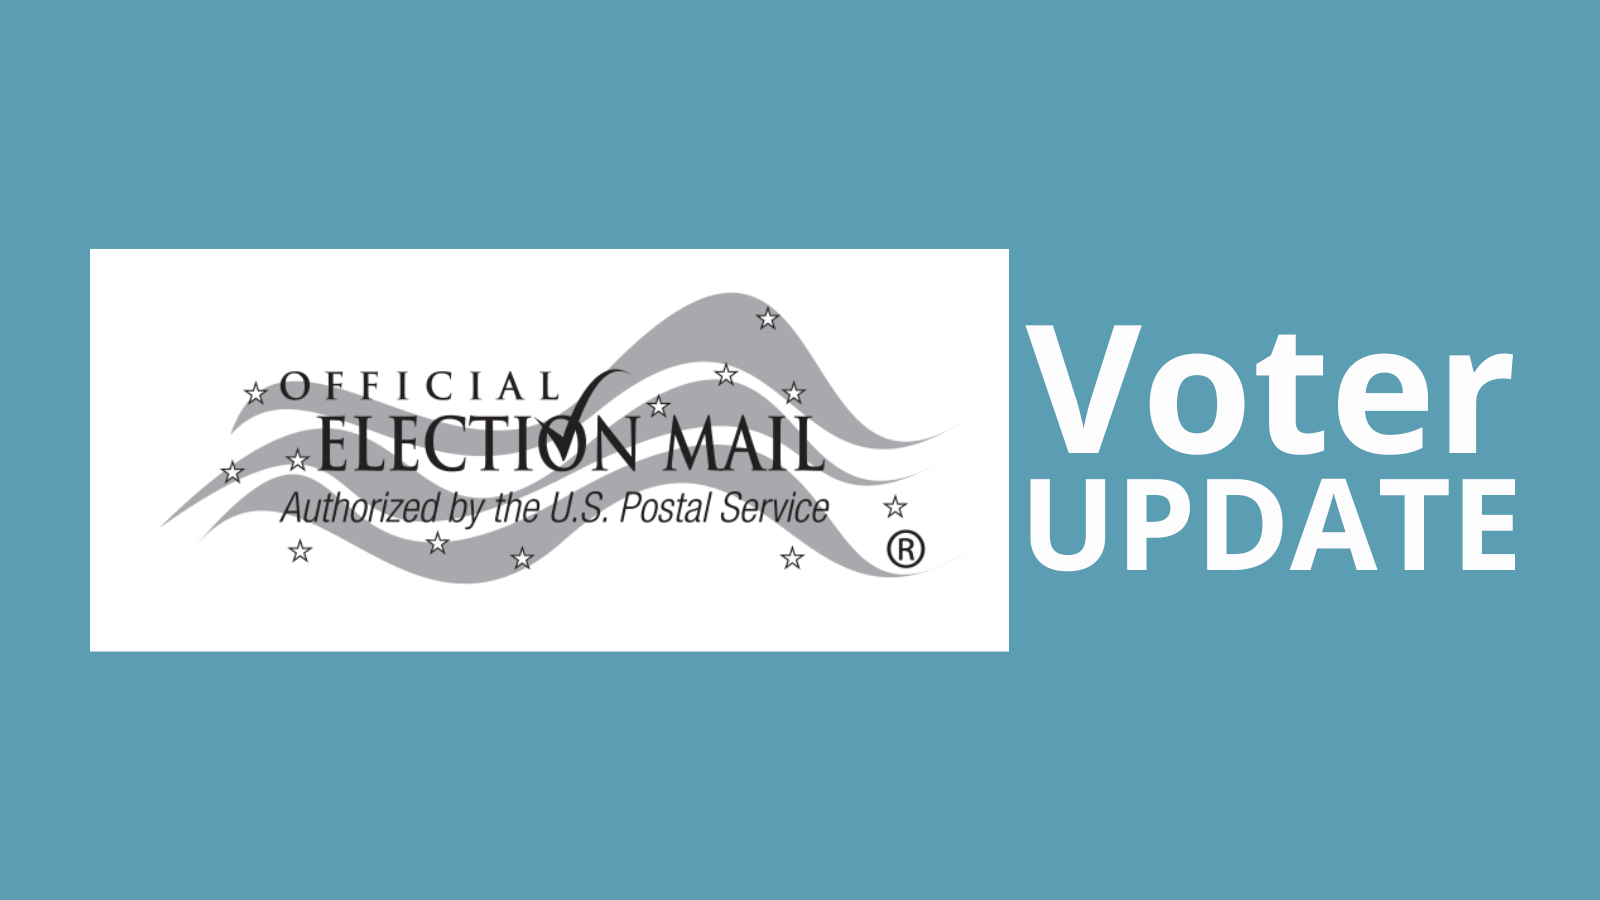 Graphic of Official Election Mail Authorized by the U.S. Postal Service next to text that says Voter Update